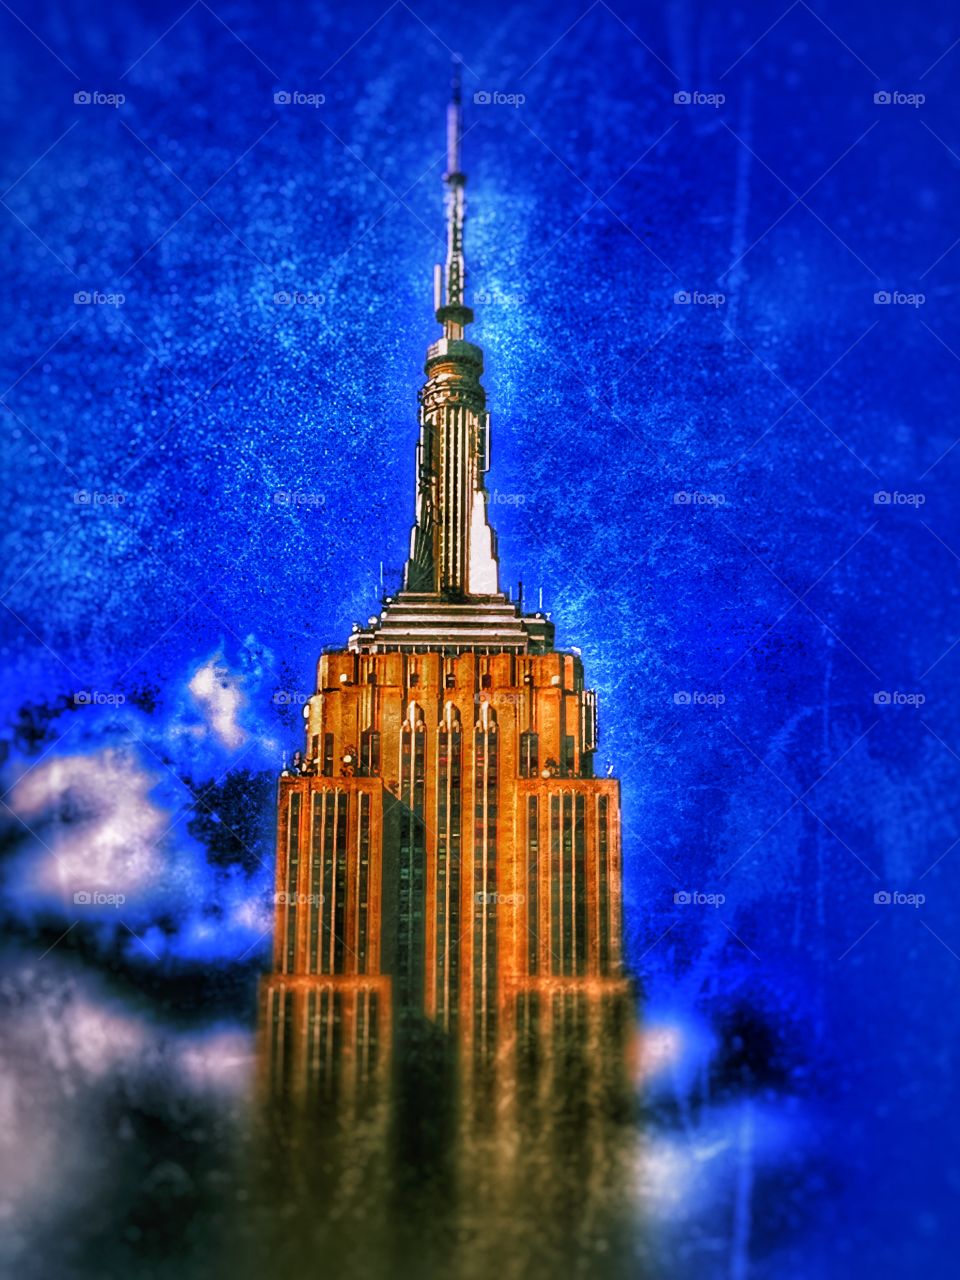 Empire State Building

